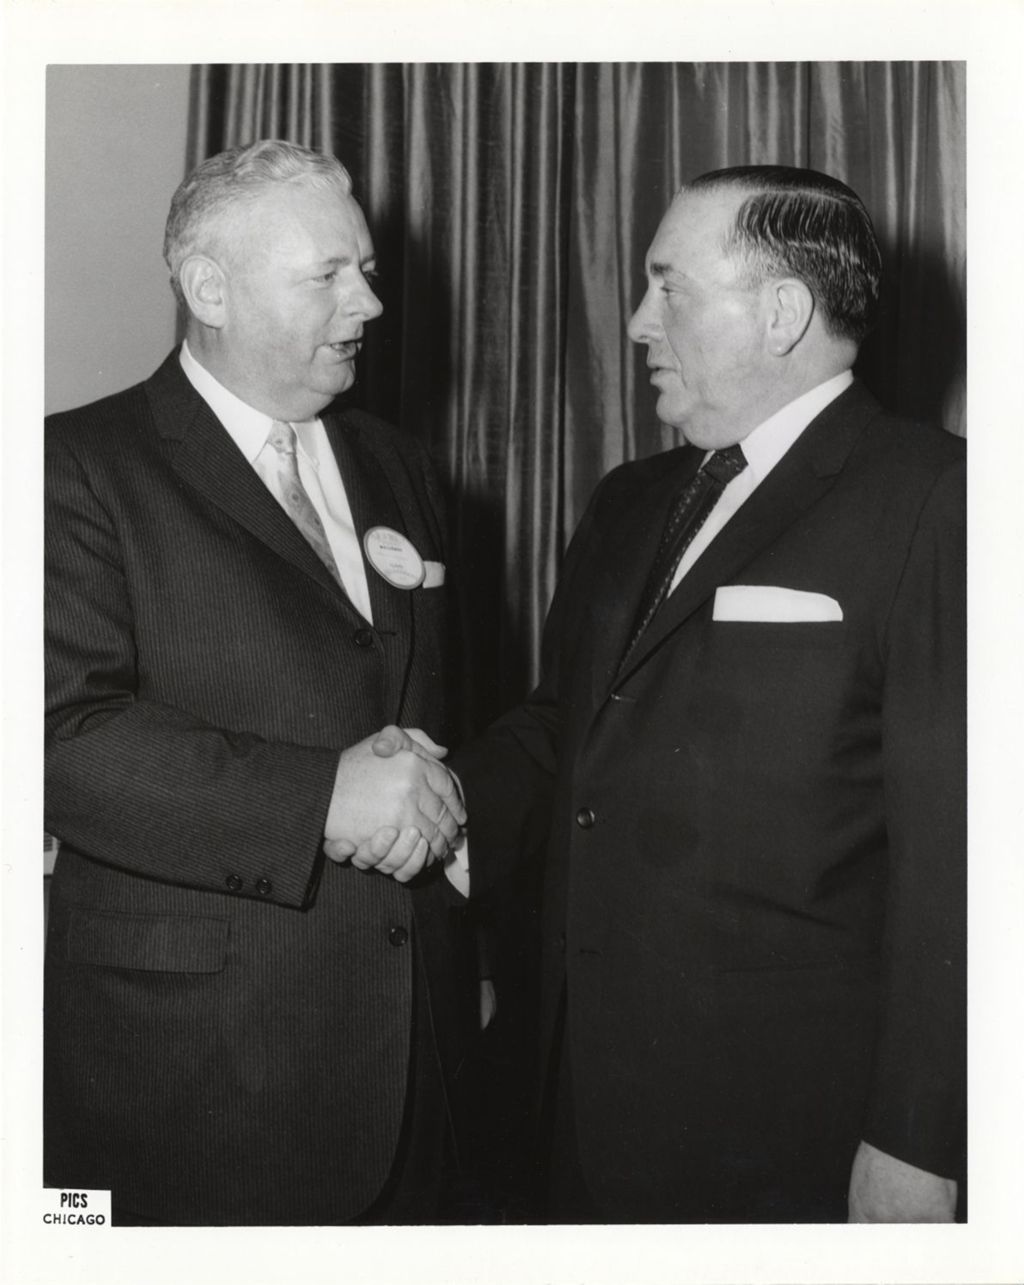 Richard J. Daley shaking hands with a man